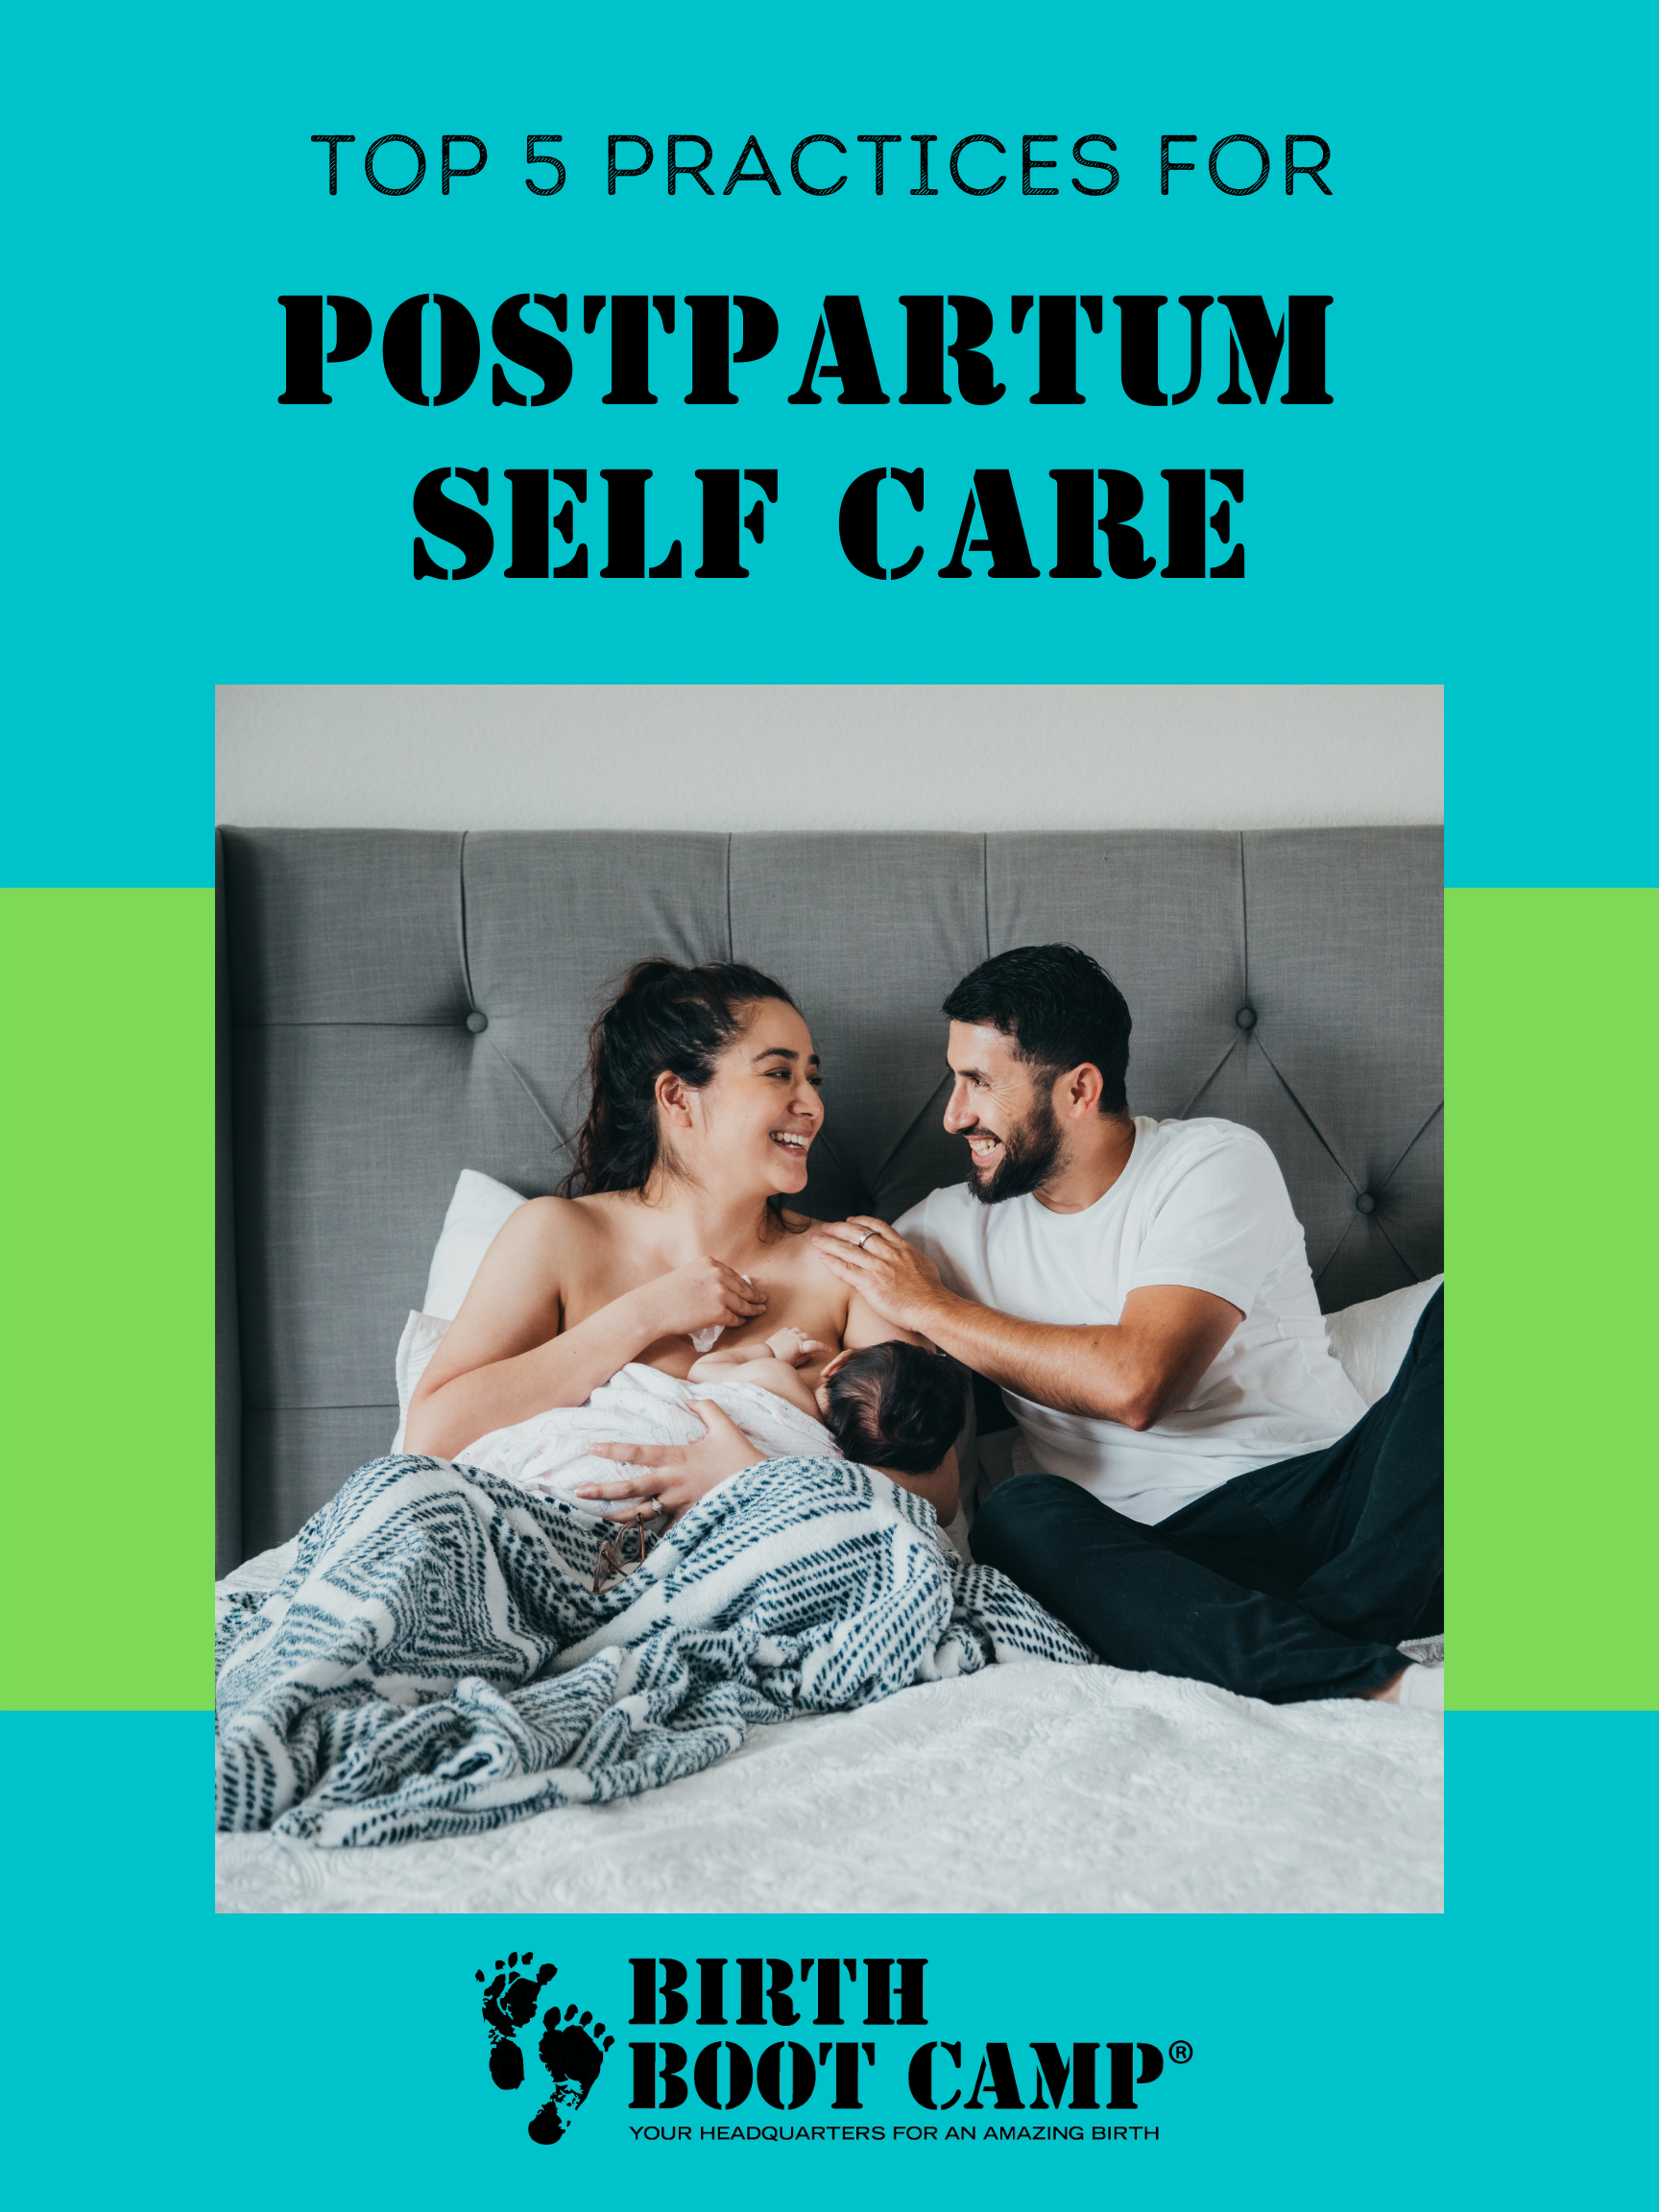 Top 5 Practices for Postpartum Self Care